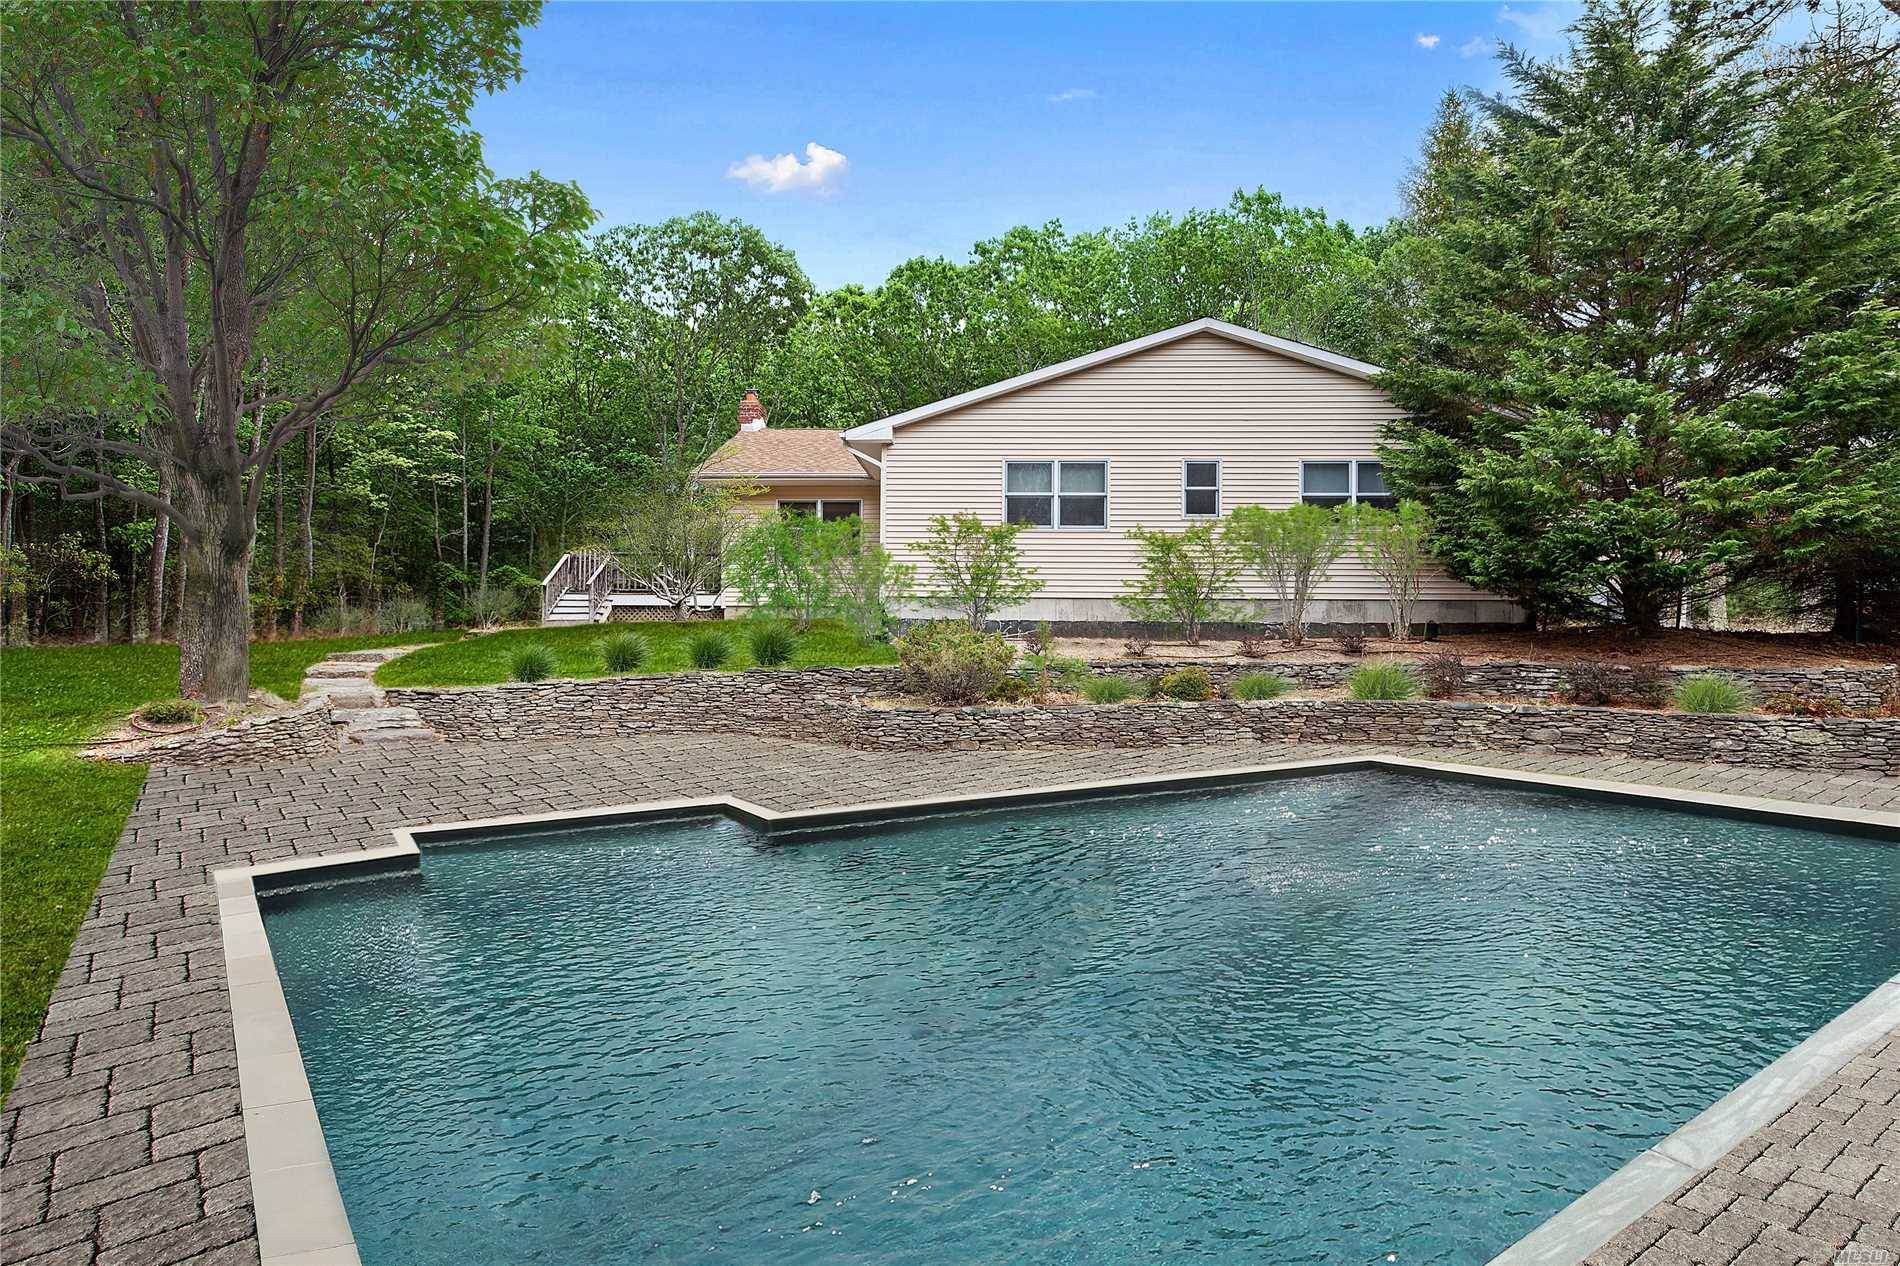 This Open Layout Contemporary Is Centrally Located In East Hampton And Is Situated At The End Of A Quiet Cul-De-Sac.